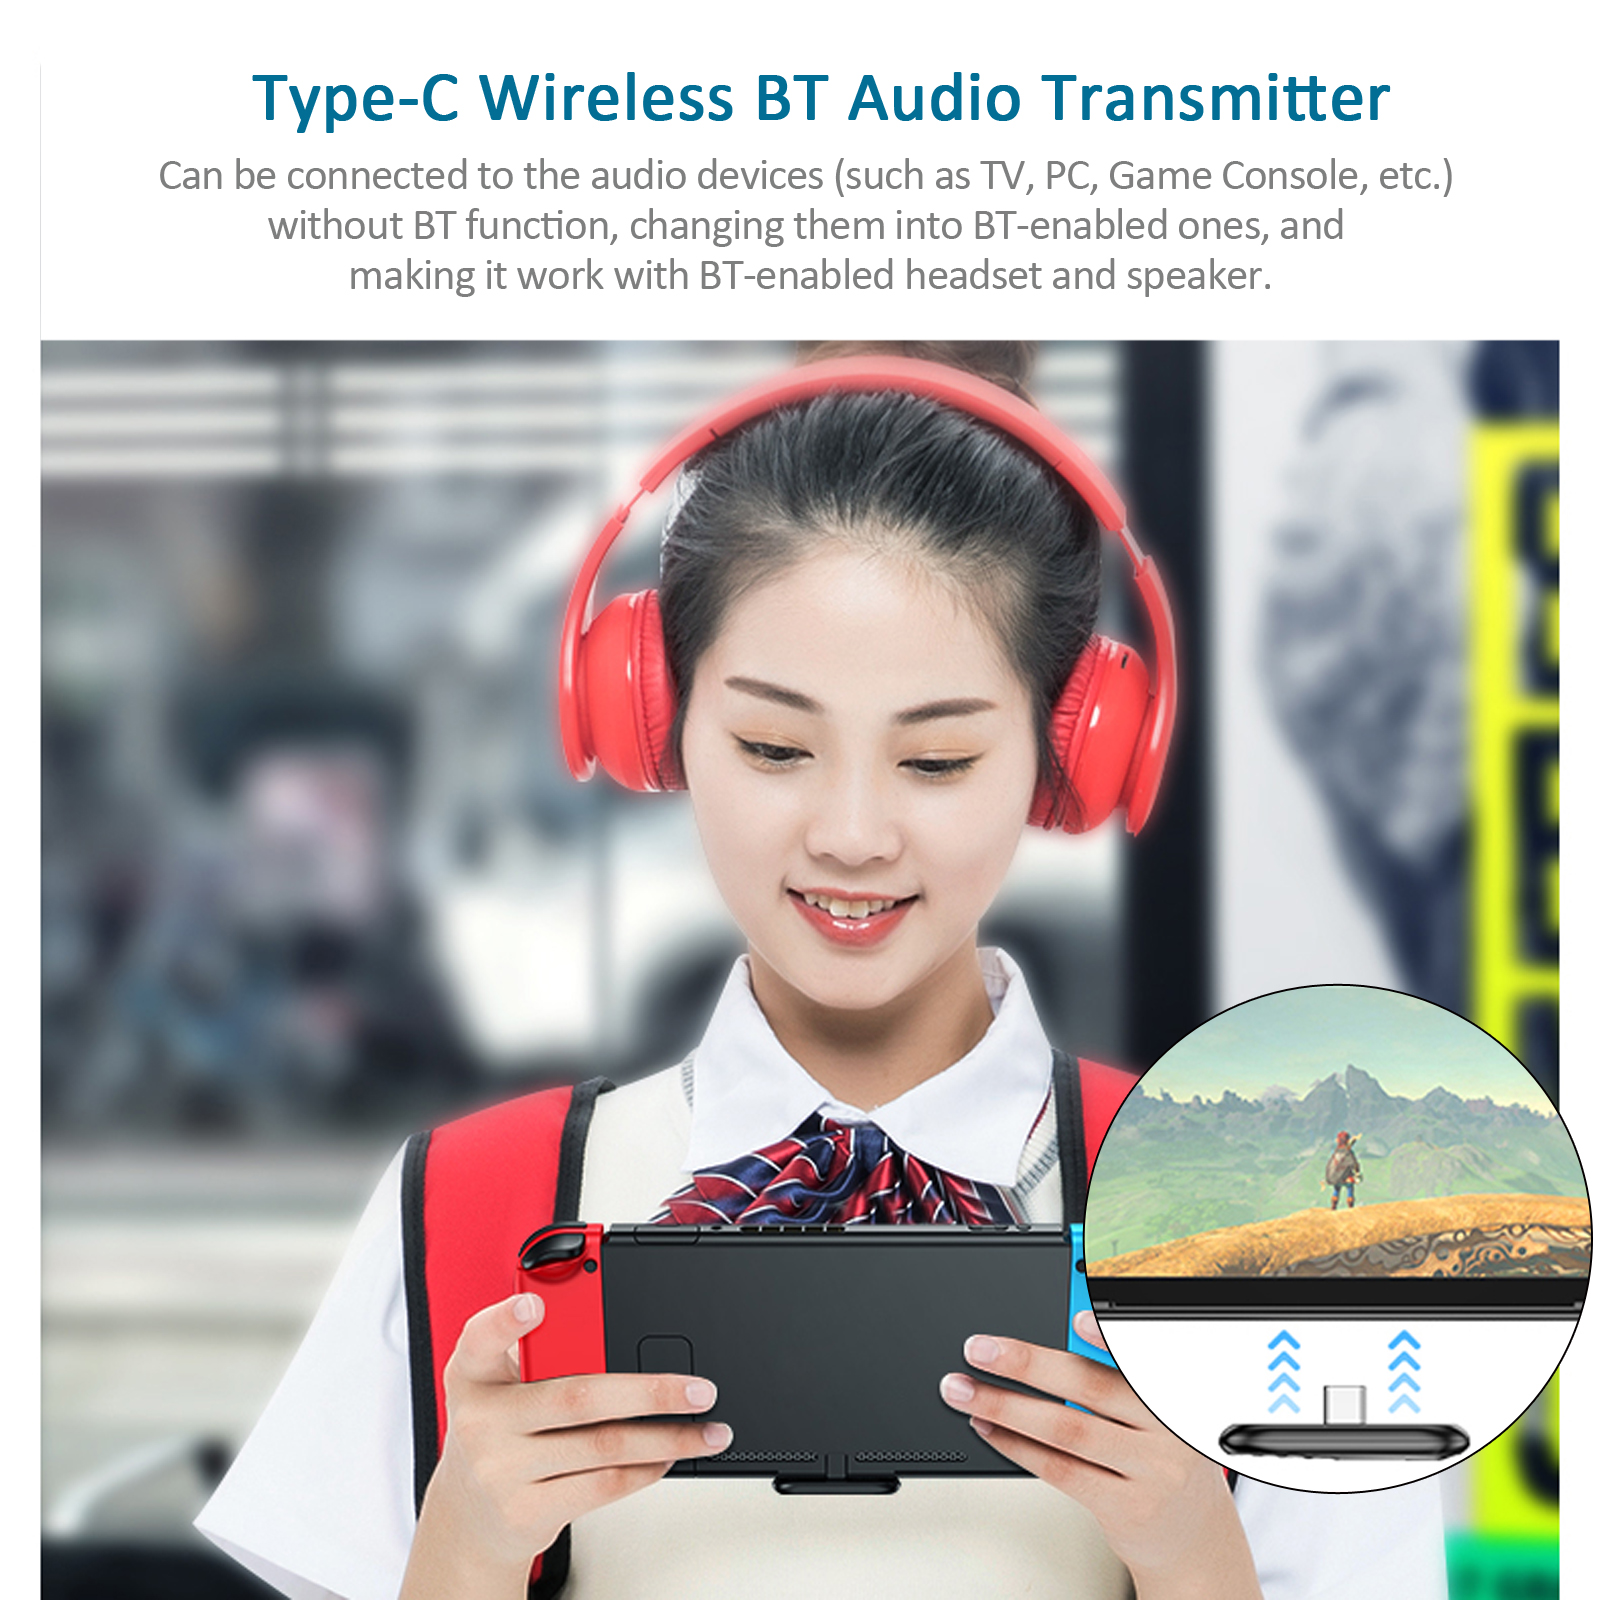 Bakeey-Type-C-bluetooth-50-Audio-Transmitter-Wireless-Adapter-with-USB-Converter-Compatible-with-Swi-1791283-3